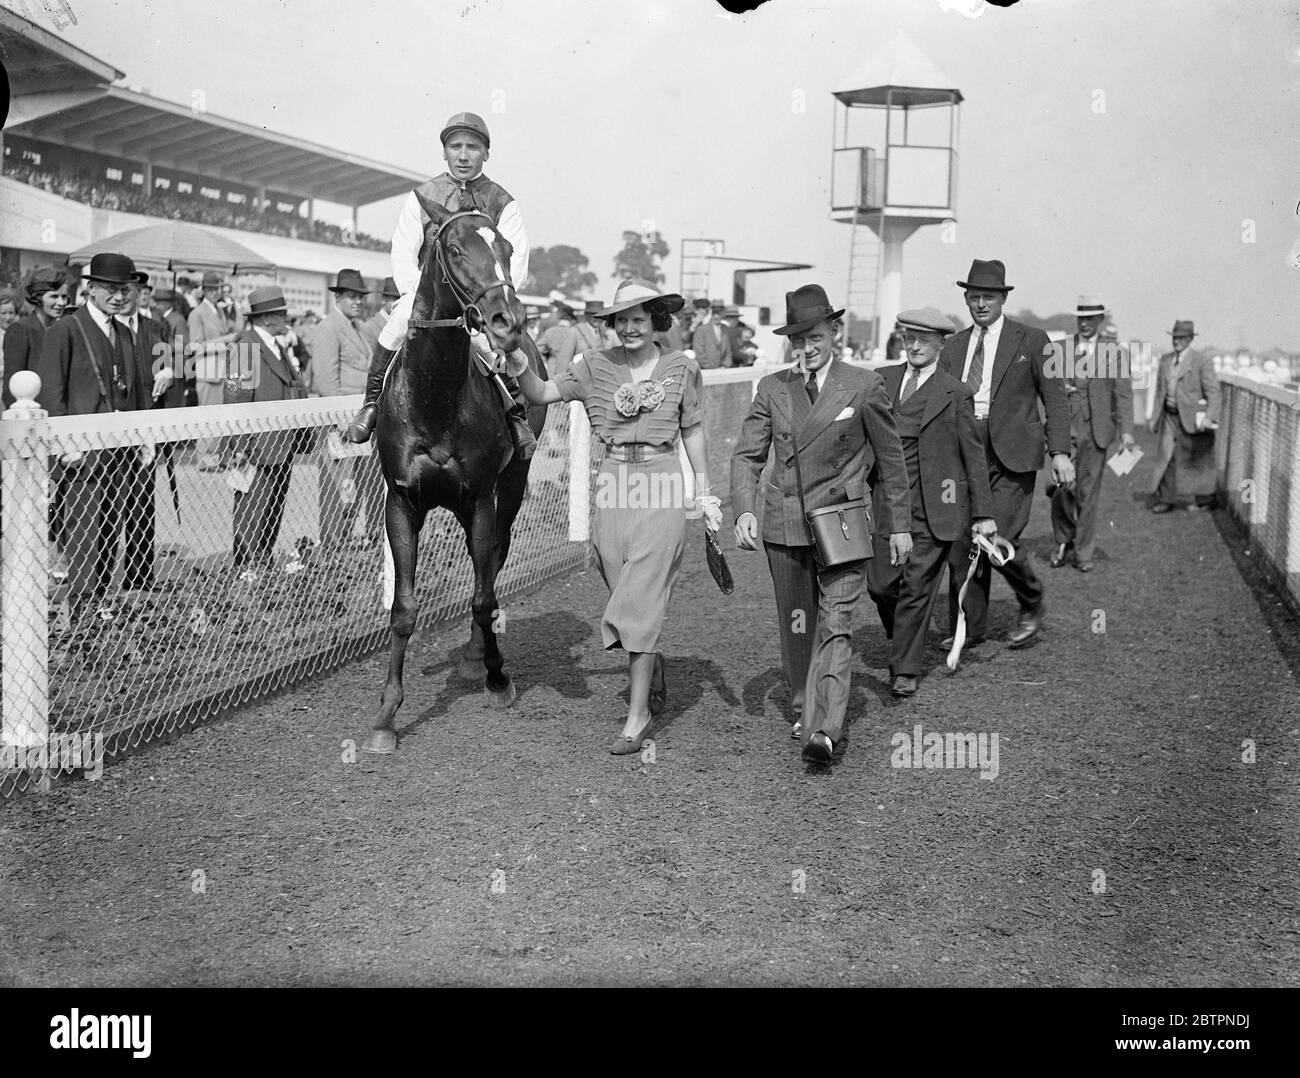 Northolt Derby 'Hat Trick '. Short Ration one Northolt Derby at Northolt gaining for Pat Donoghue, the trainer his third successive win in the Northolt Derby. Short Ration is owned by Miss Chester Beatty. Photo shows, Mrs Pat Donoghue, wife of the trainer, leading in Short Ration after his victory, with Pat Donoghue. 14 June 1937 Stock Photo